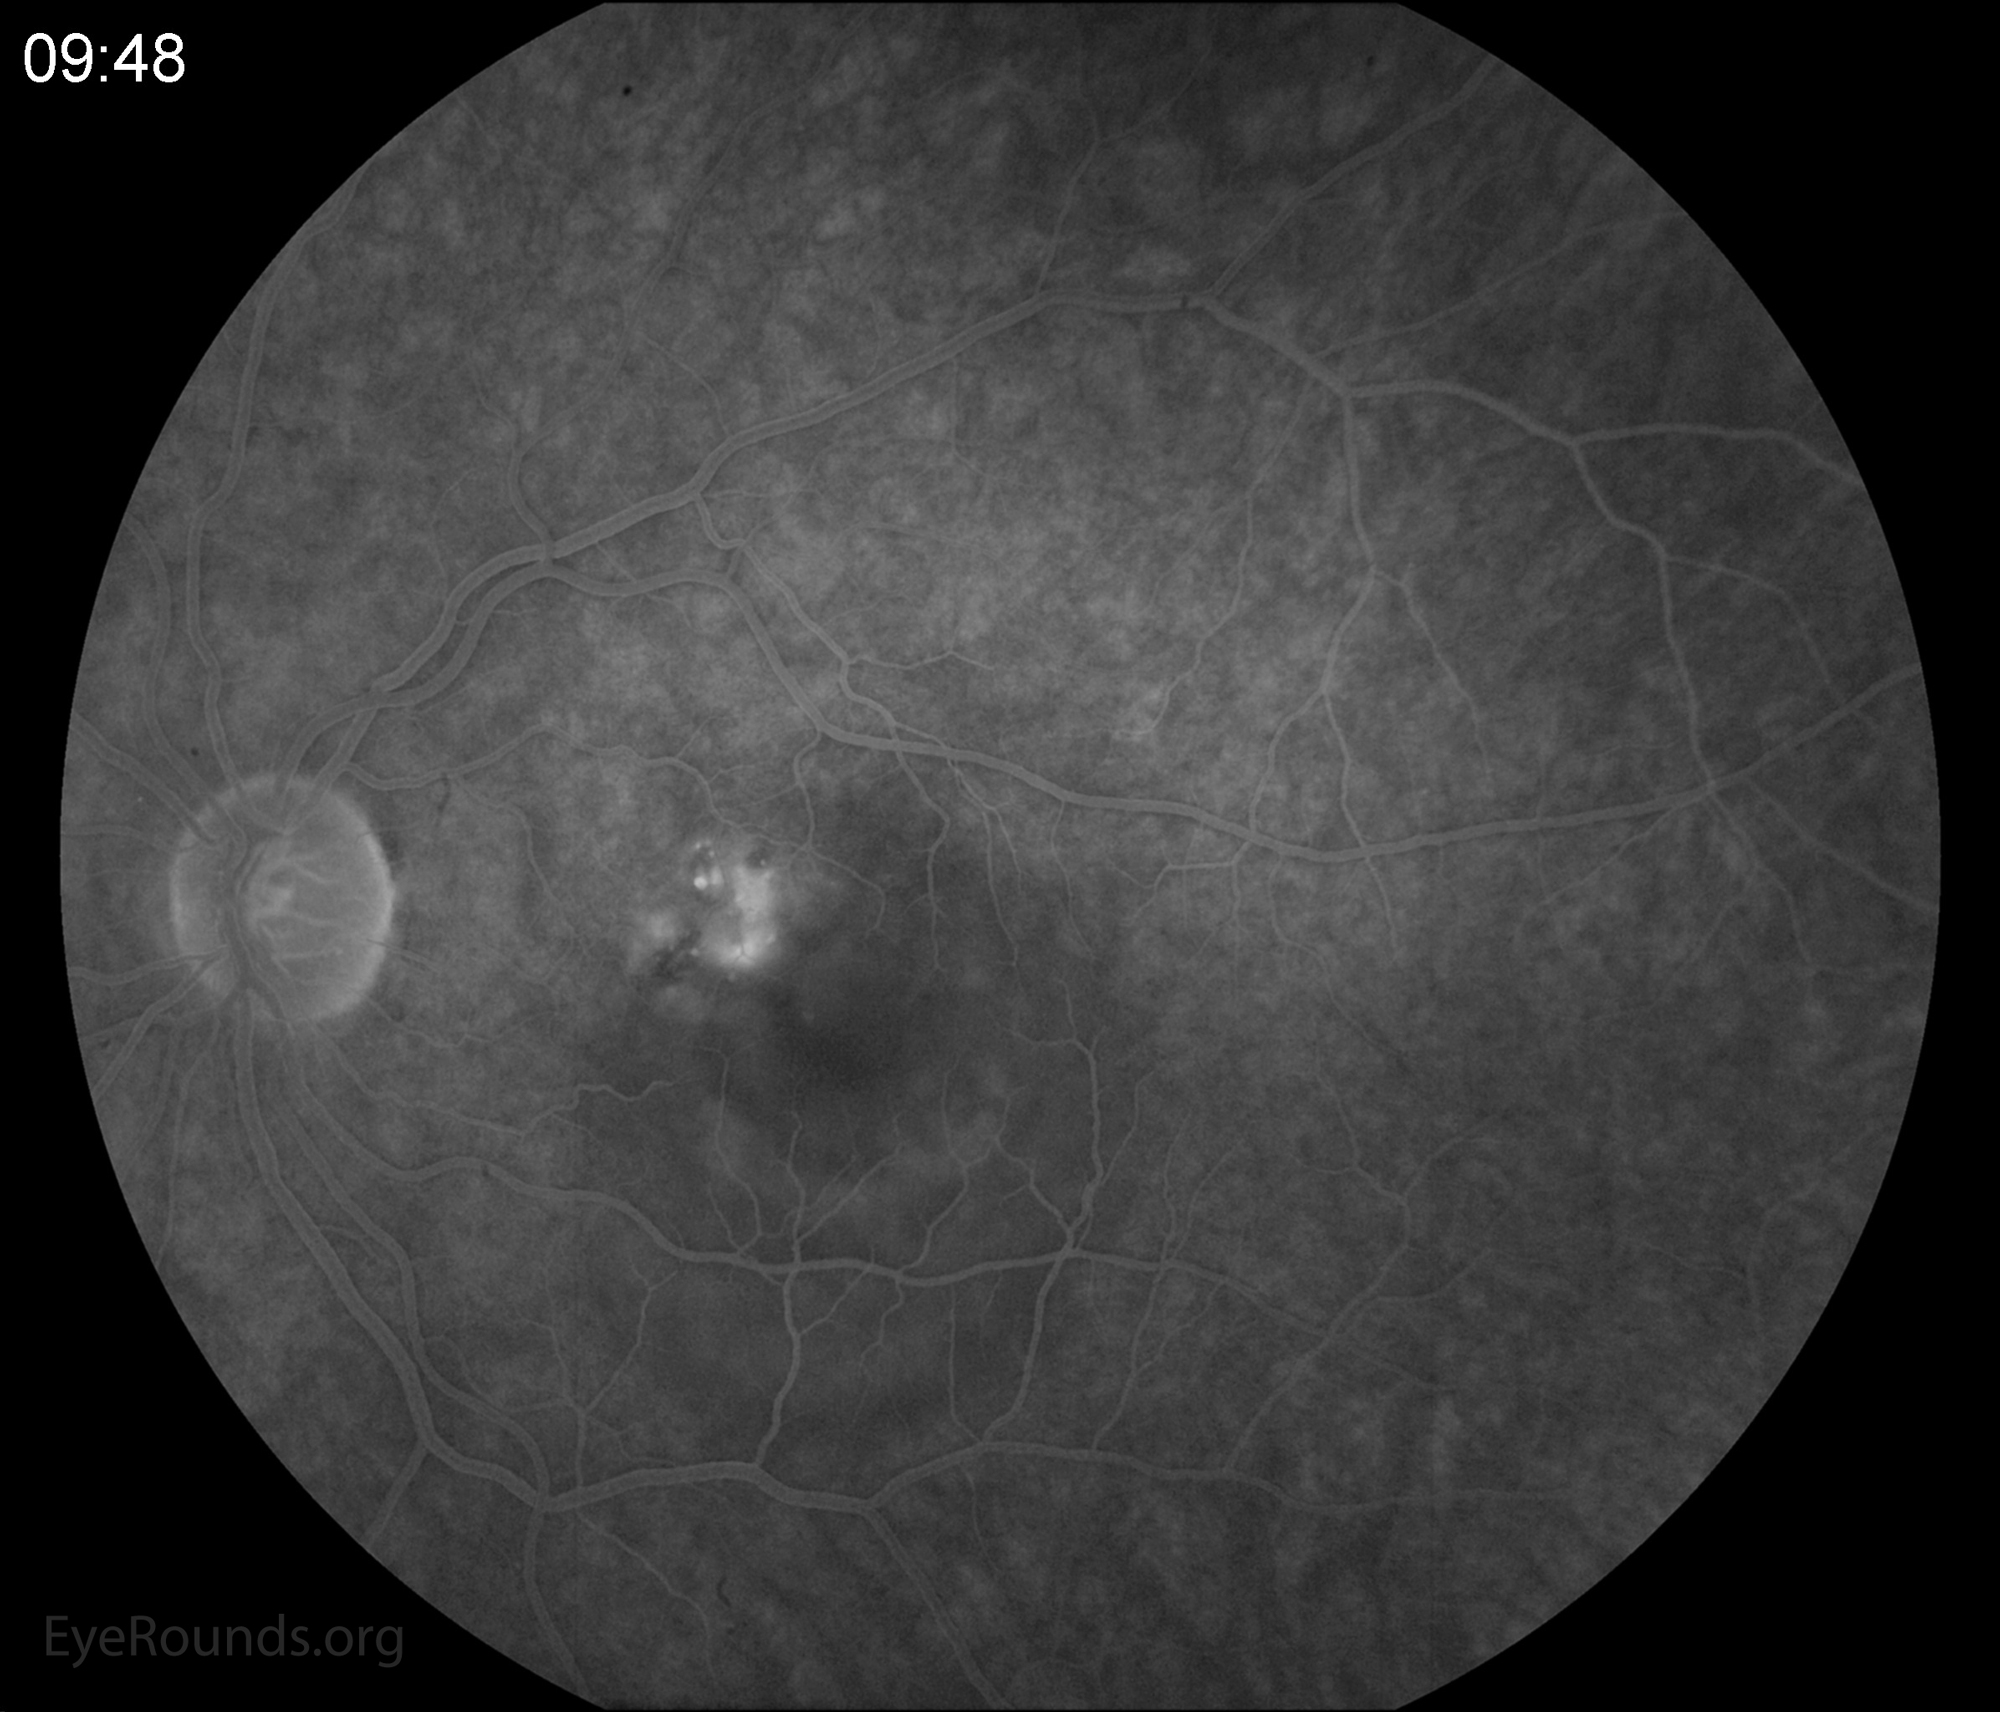 There are multiple leakage points including the fovea on fluorescein angiography. In the late phase, one can see the classic "smokestack" leakage of dye 9 minutes and 48 seconds